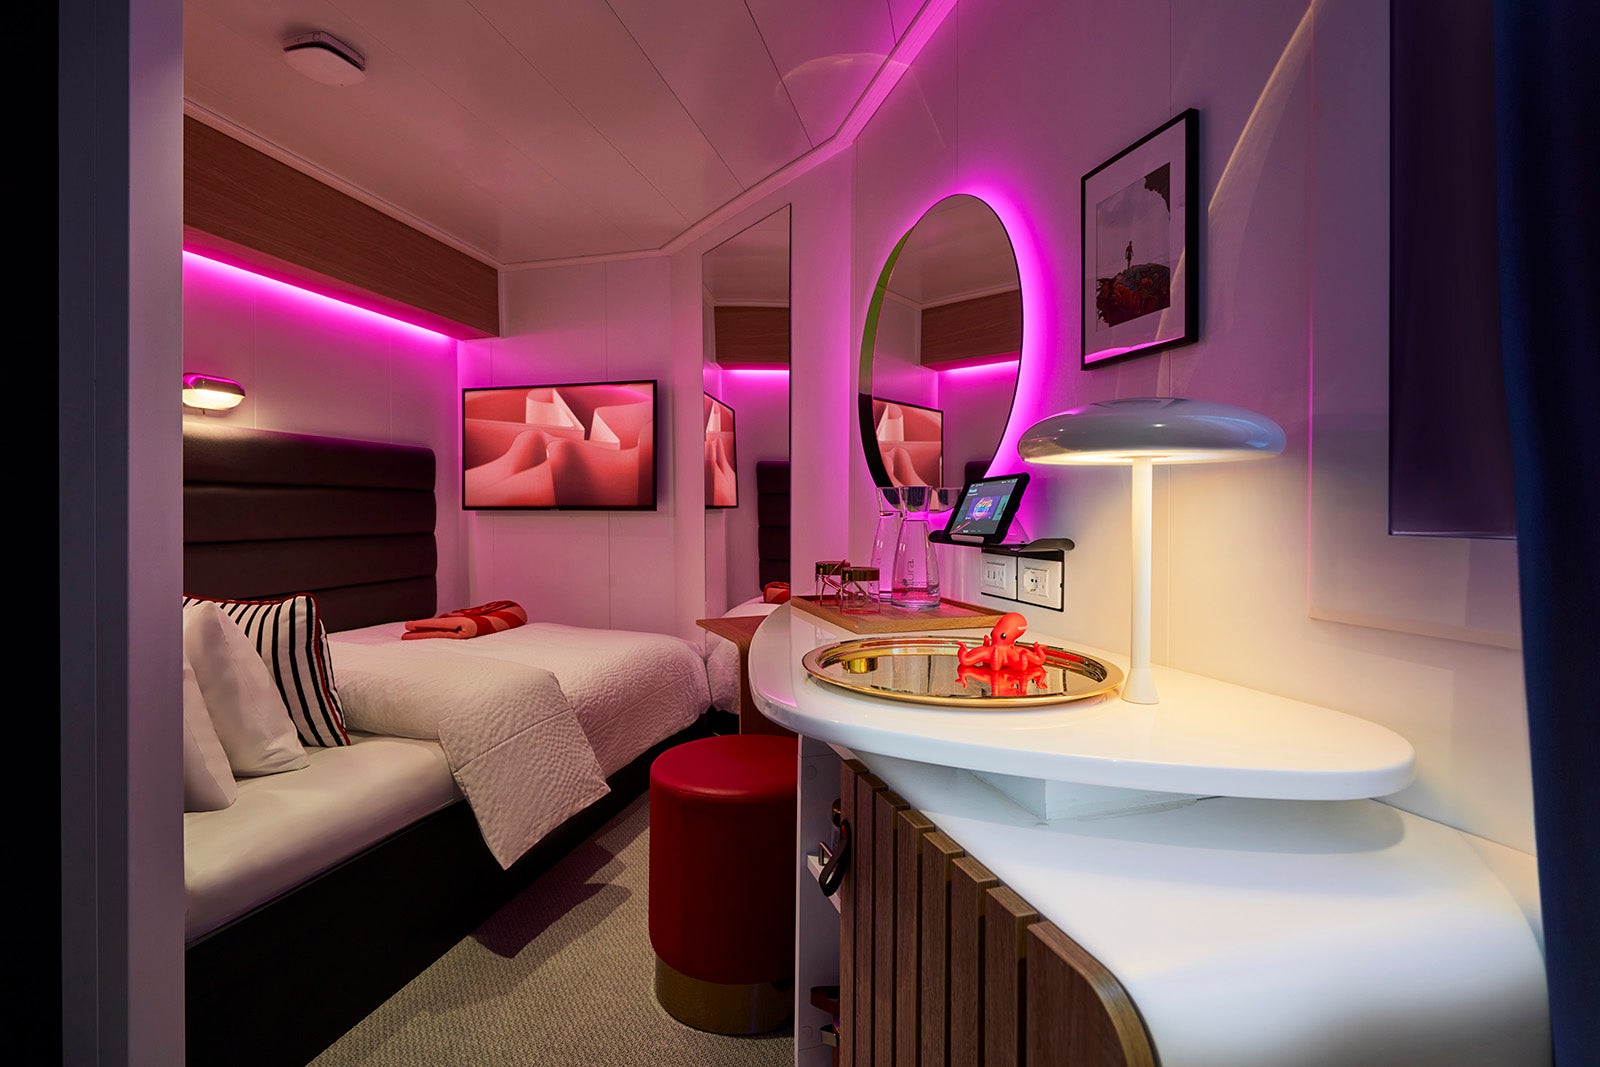 Interior of Virgin Voyages cruise cabin with mood lighting